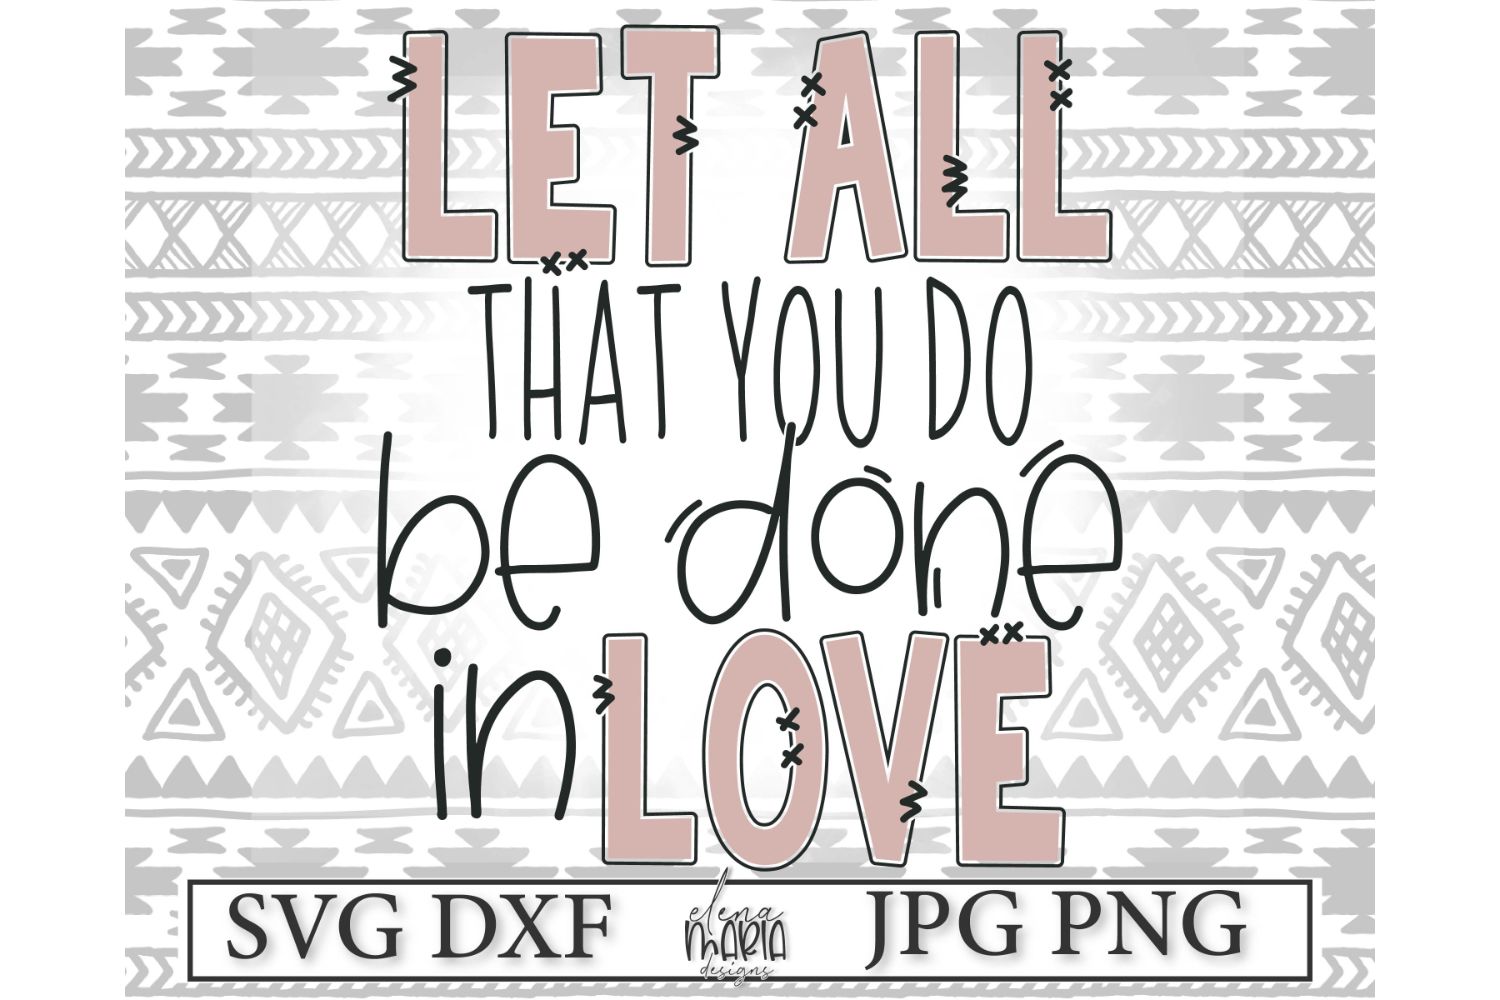 let all that you do be done in love arm tattoo